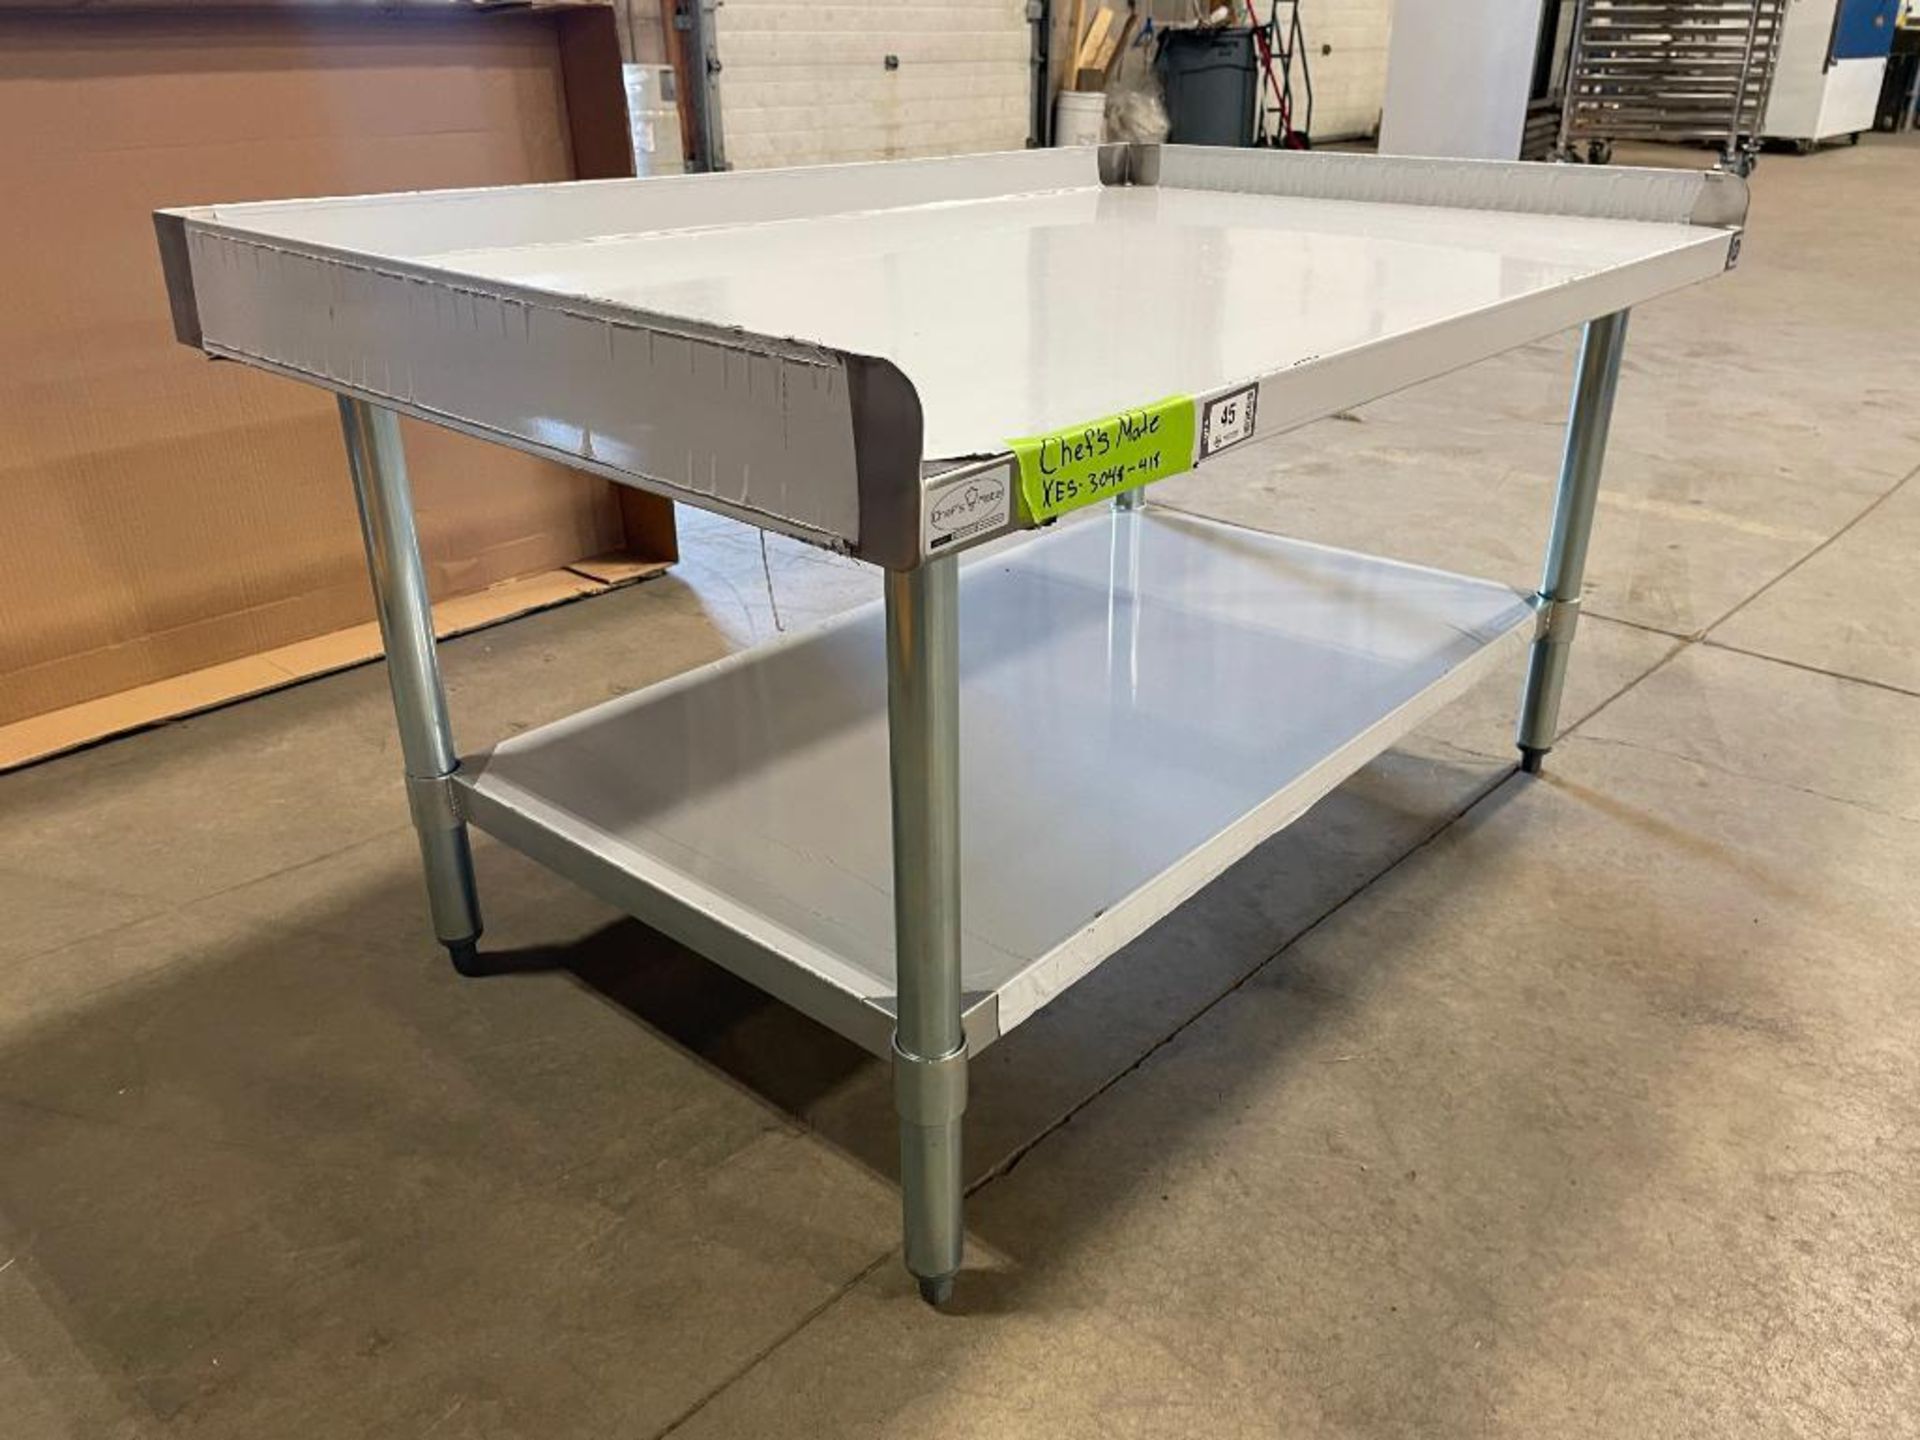 CHEF'S MATE 30" X 48" STAINLESS STEEL EQUIPMENT STAND - NEW - Image 6 of 10